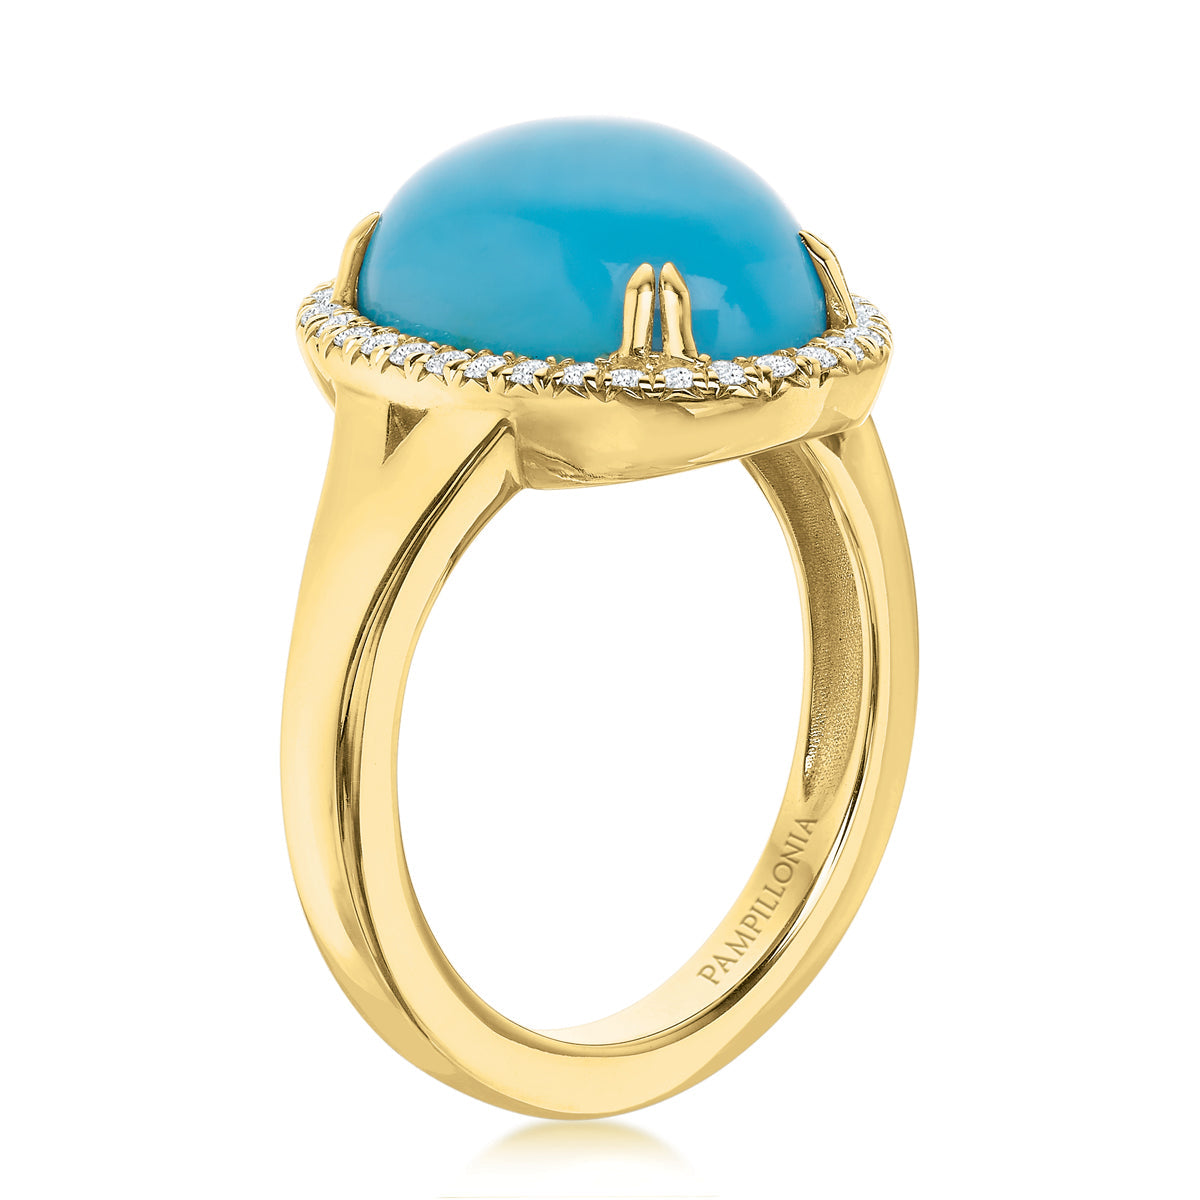 Taylor Sleeping Beauty Turquoise Ring